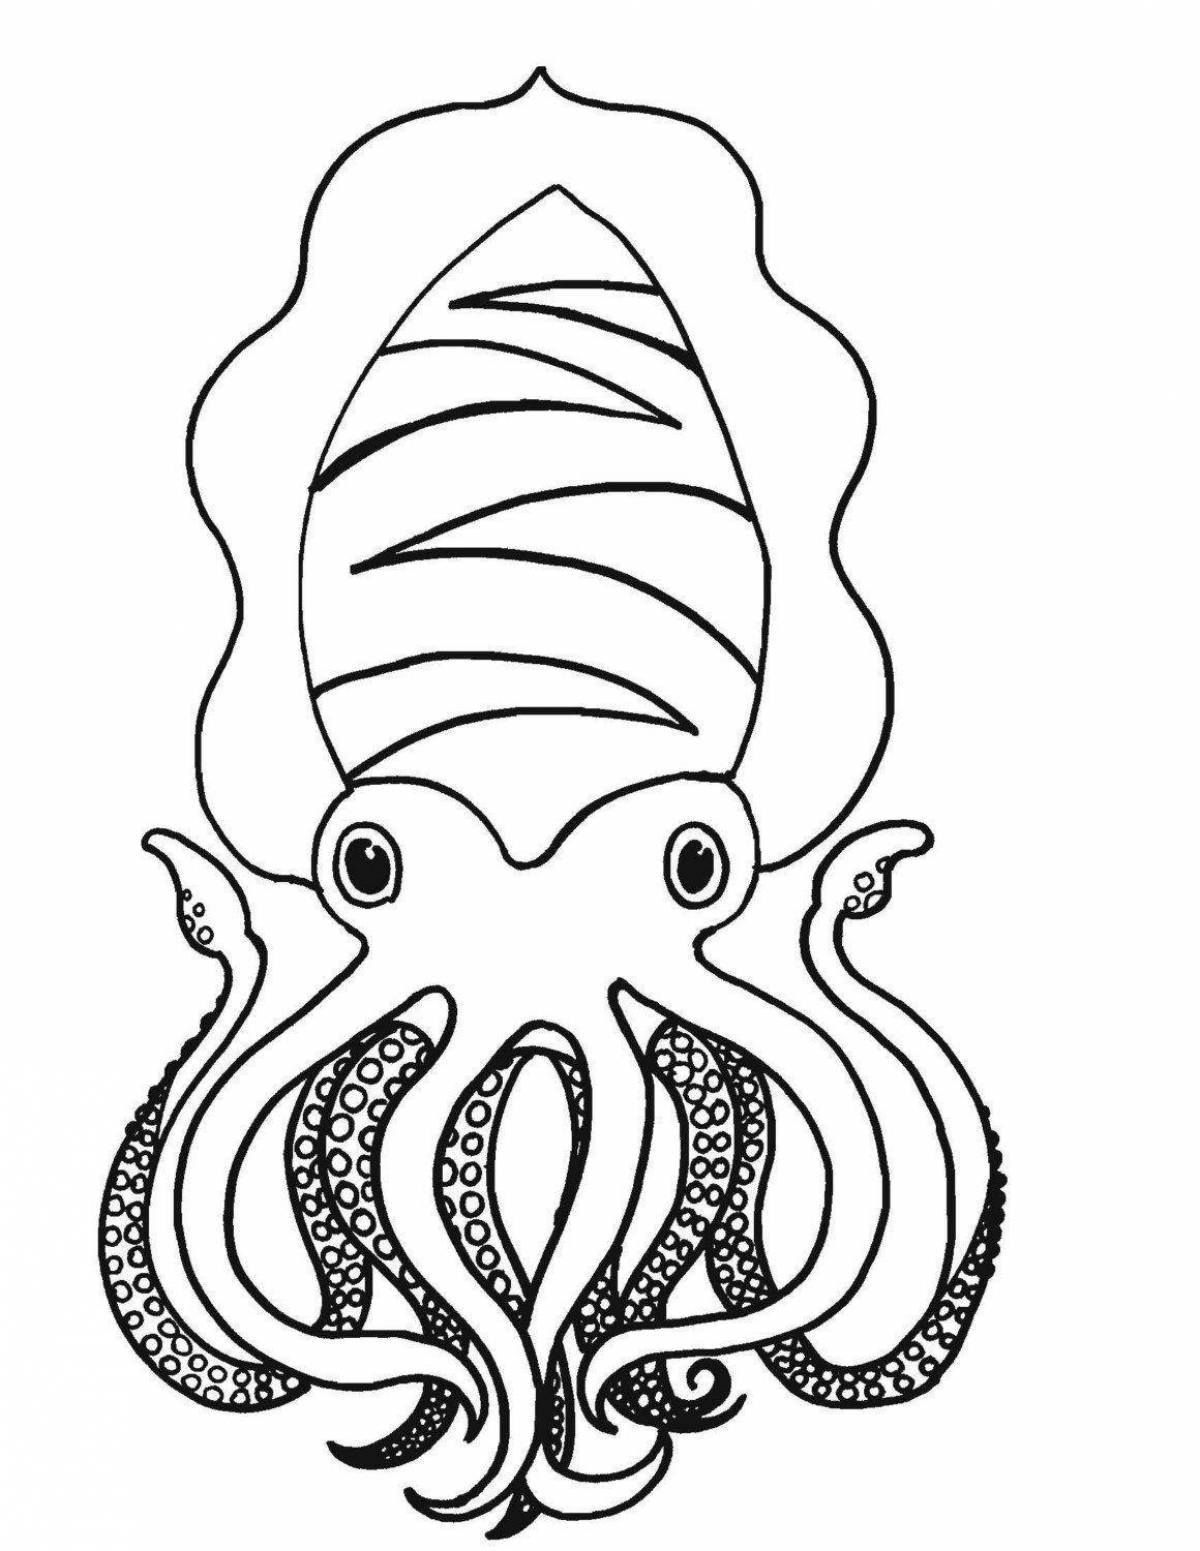 Bright cuttlefish coloring page